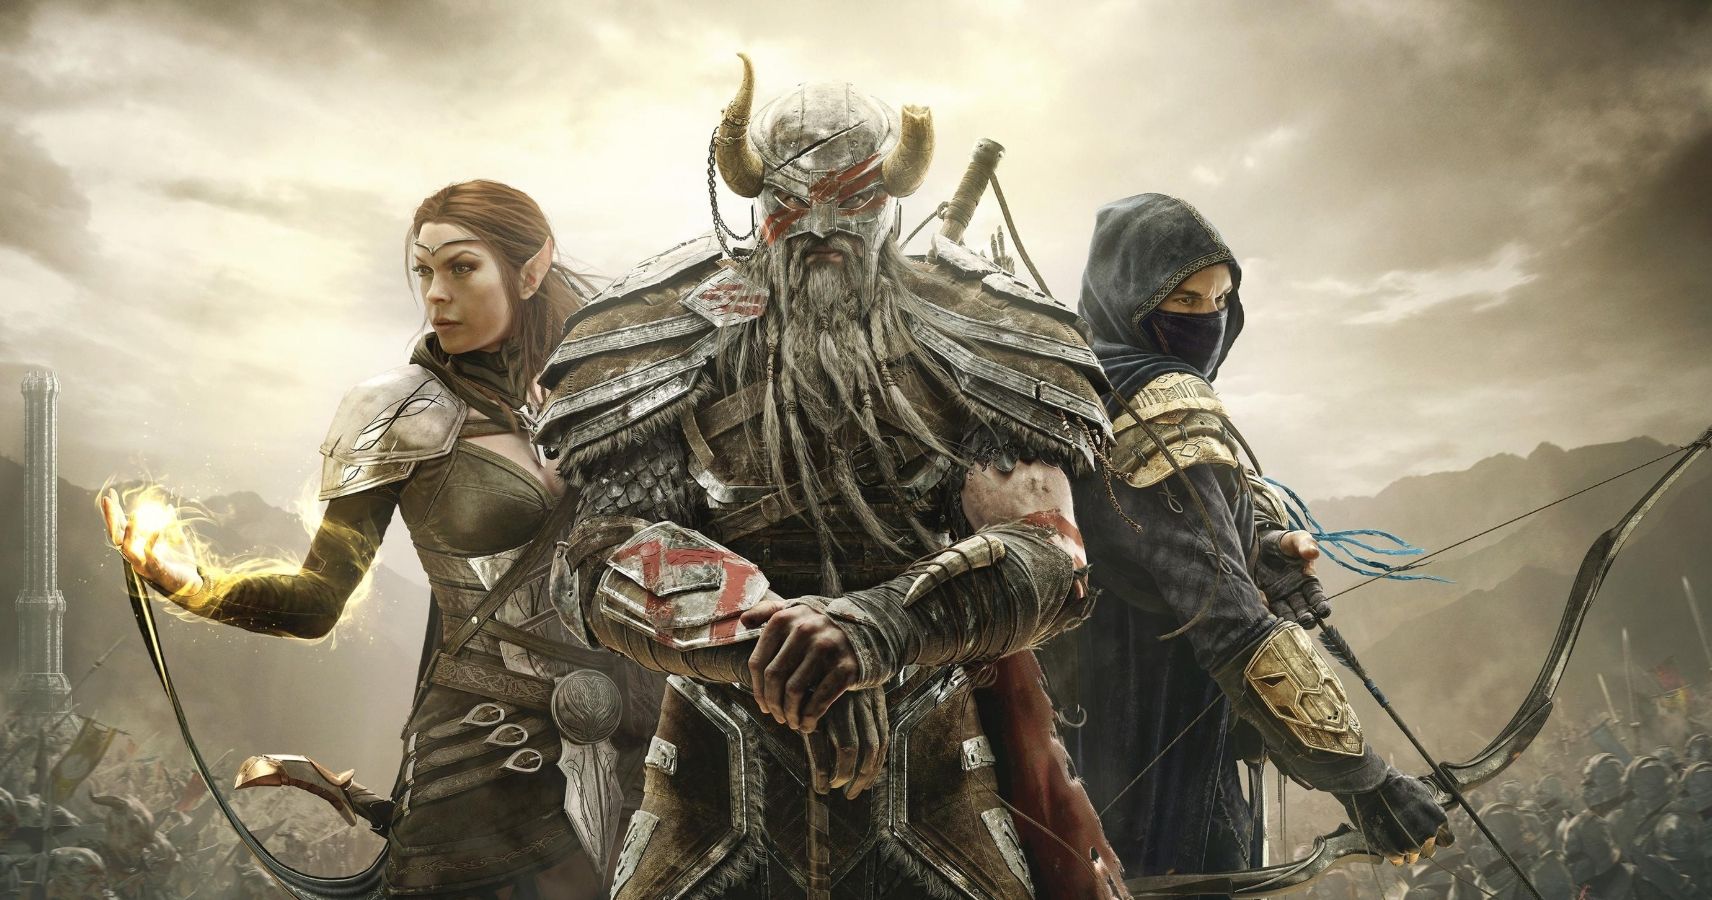 Next Elder Scrolls Online Expansion To Be Announced In January